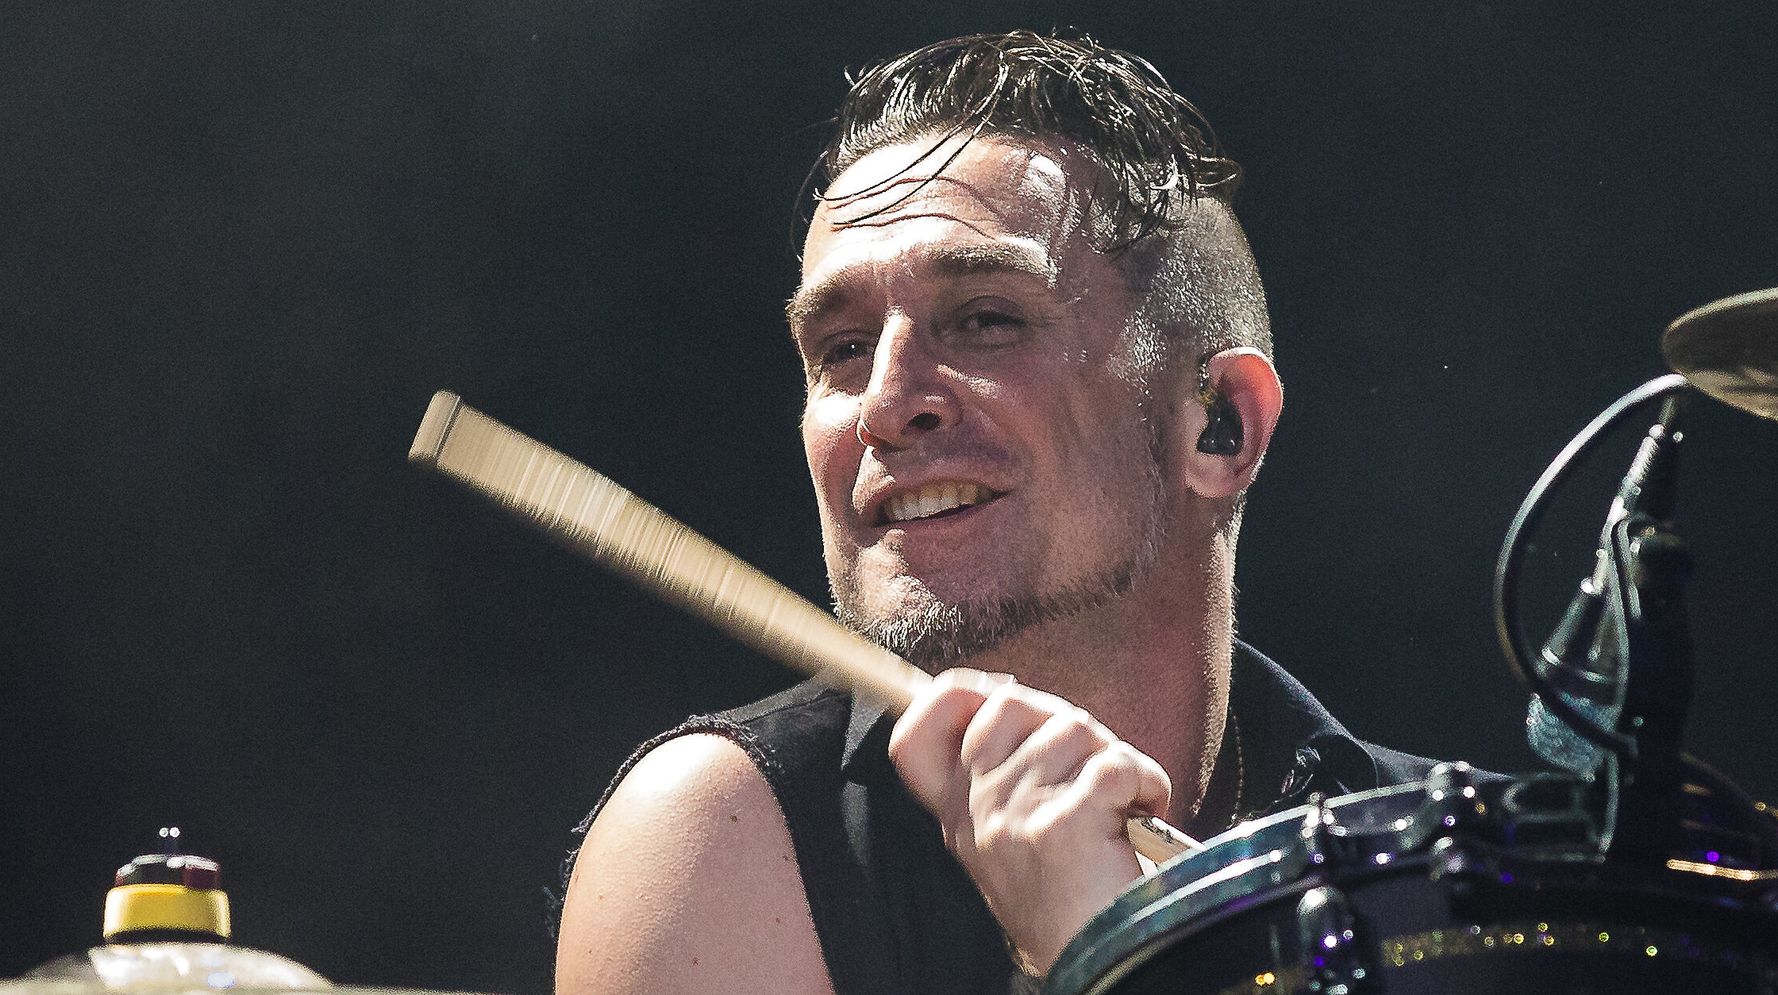 Offspring Drummer: I Was Kicked Out Of The Band For Refusing Coronavirus Vaccine